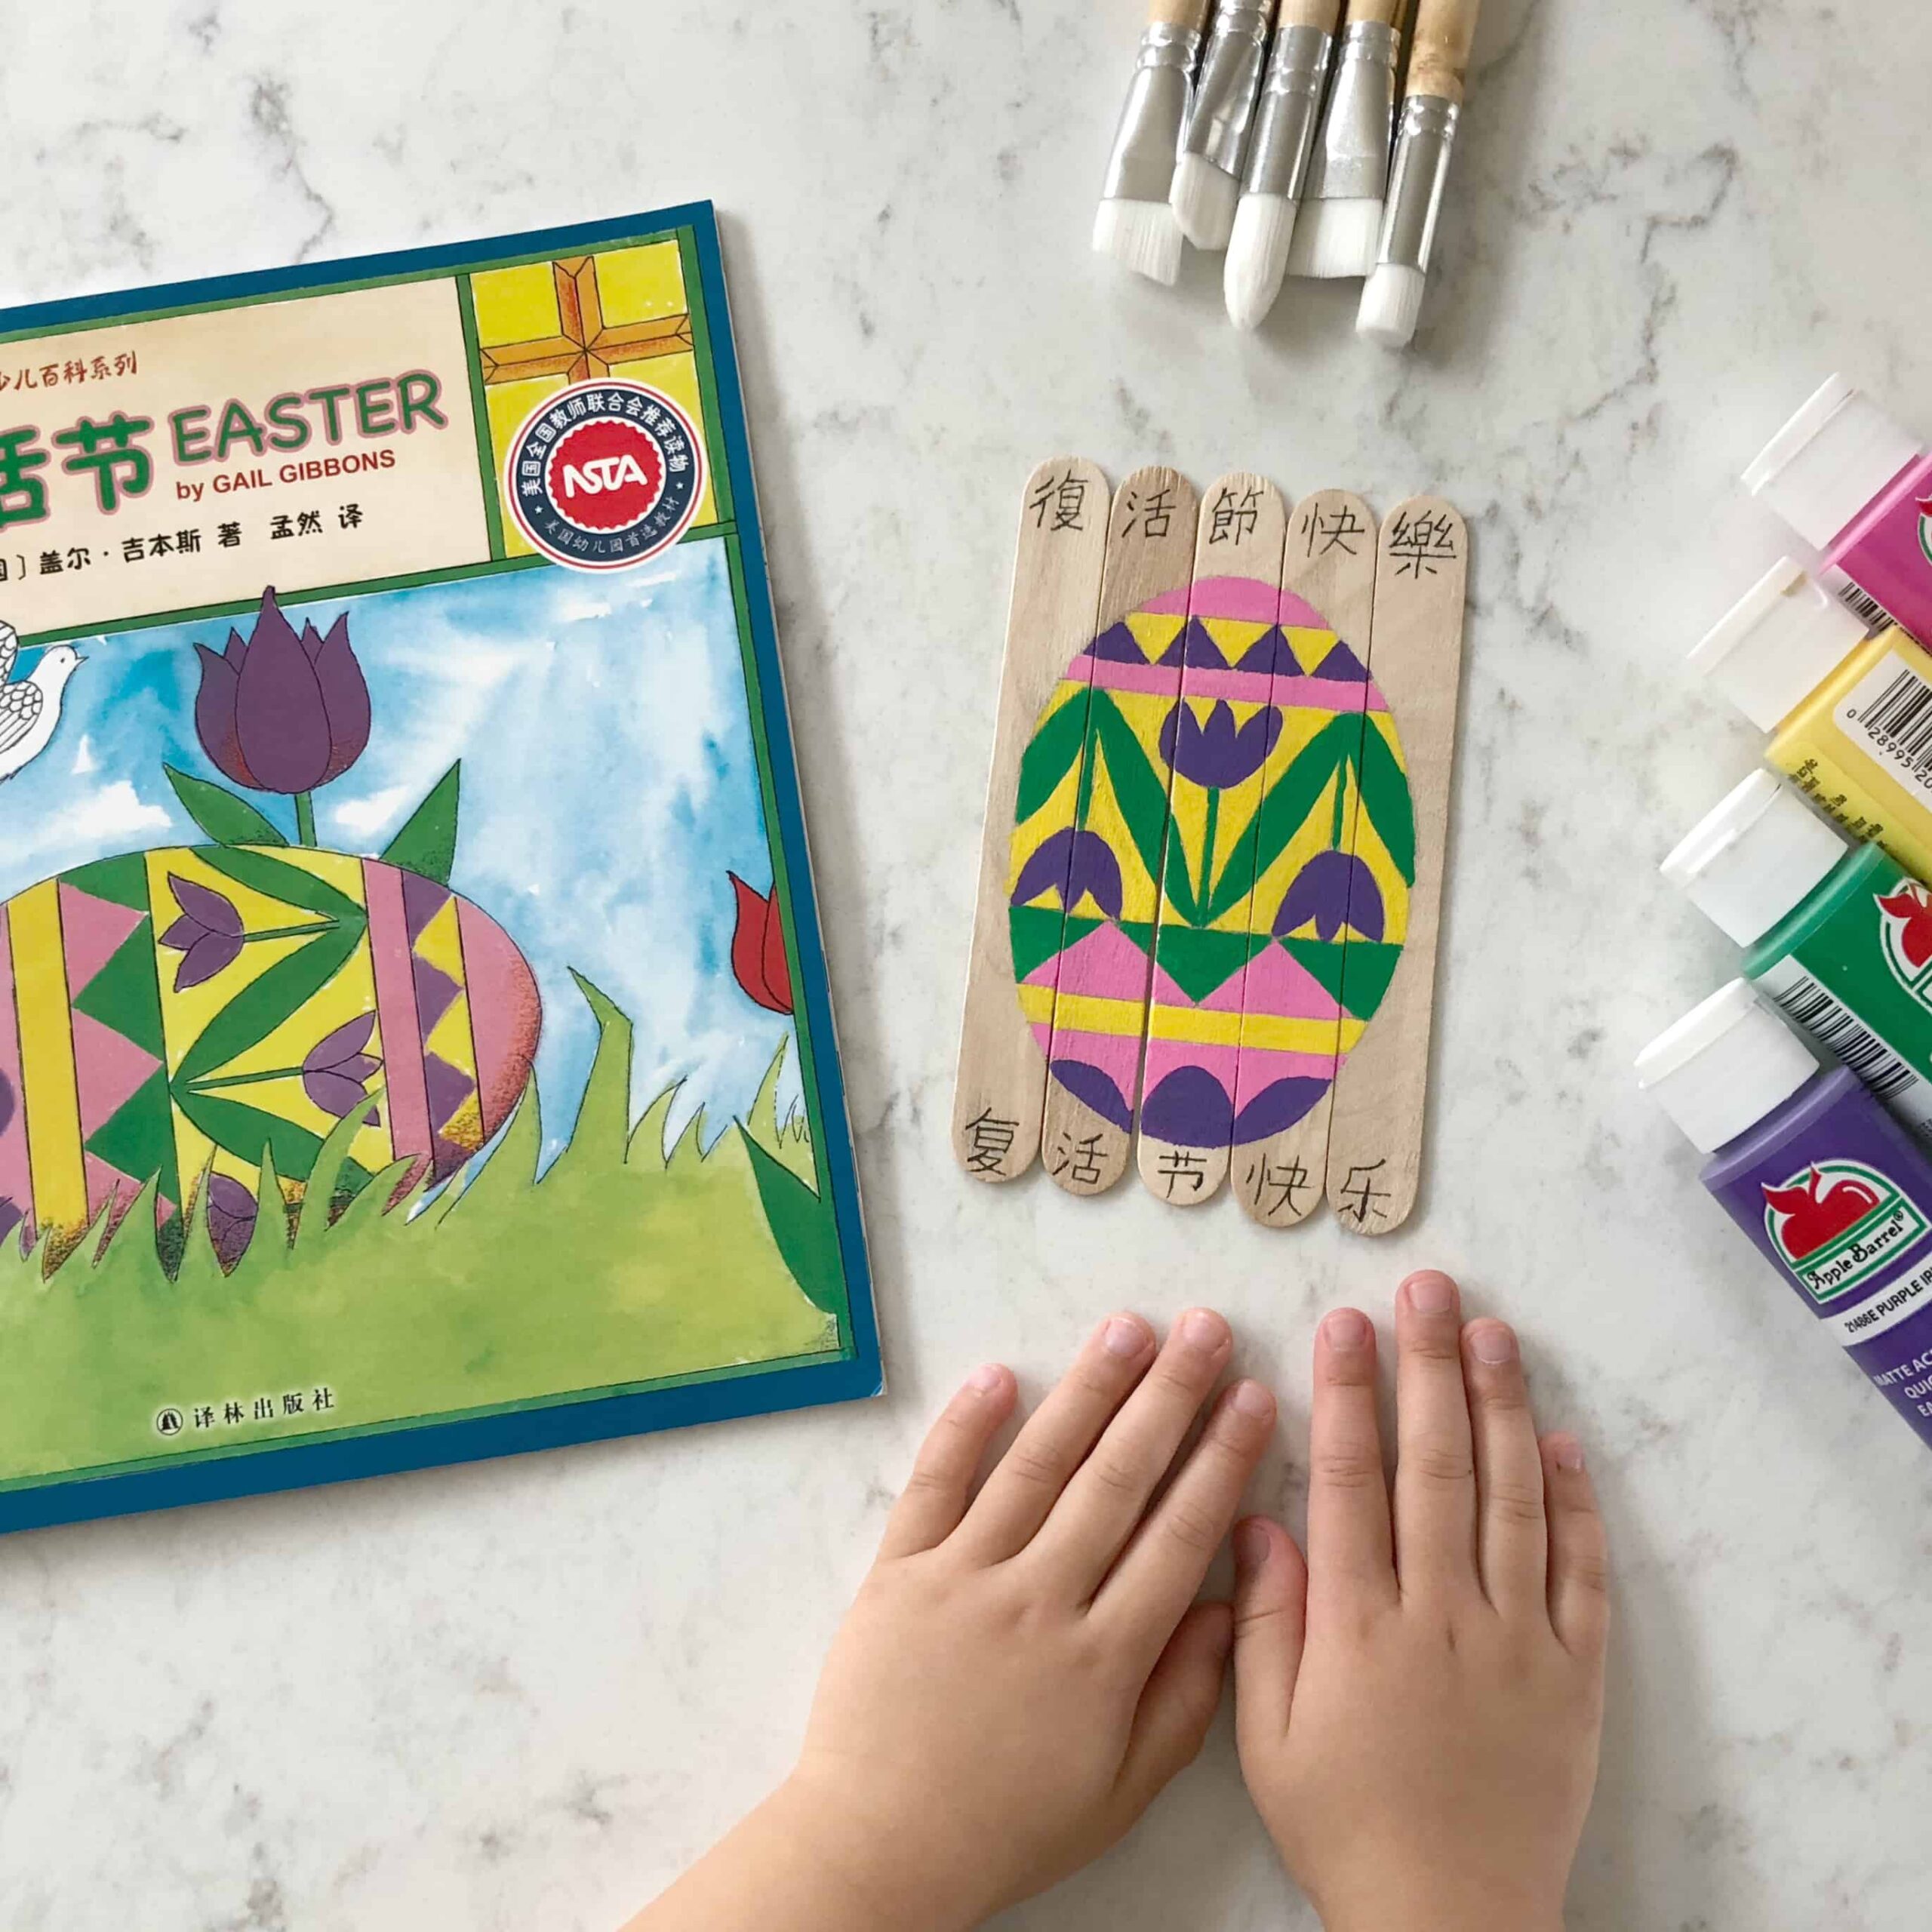 Chinese Easter Book by Gail Gibbons: 复活节 Review & Craft Stick Puzzle